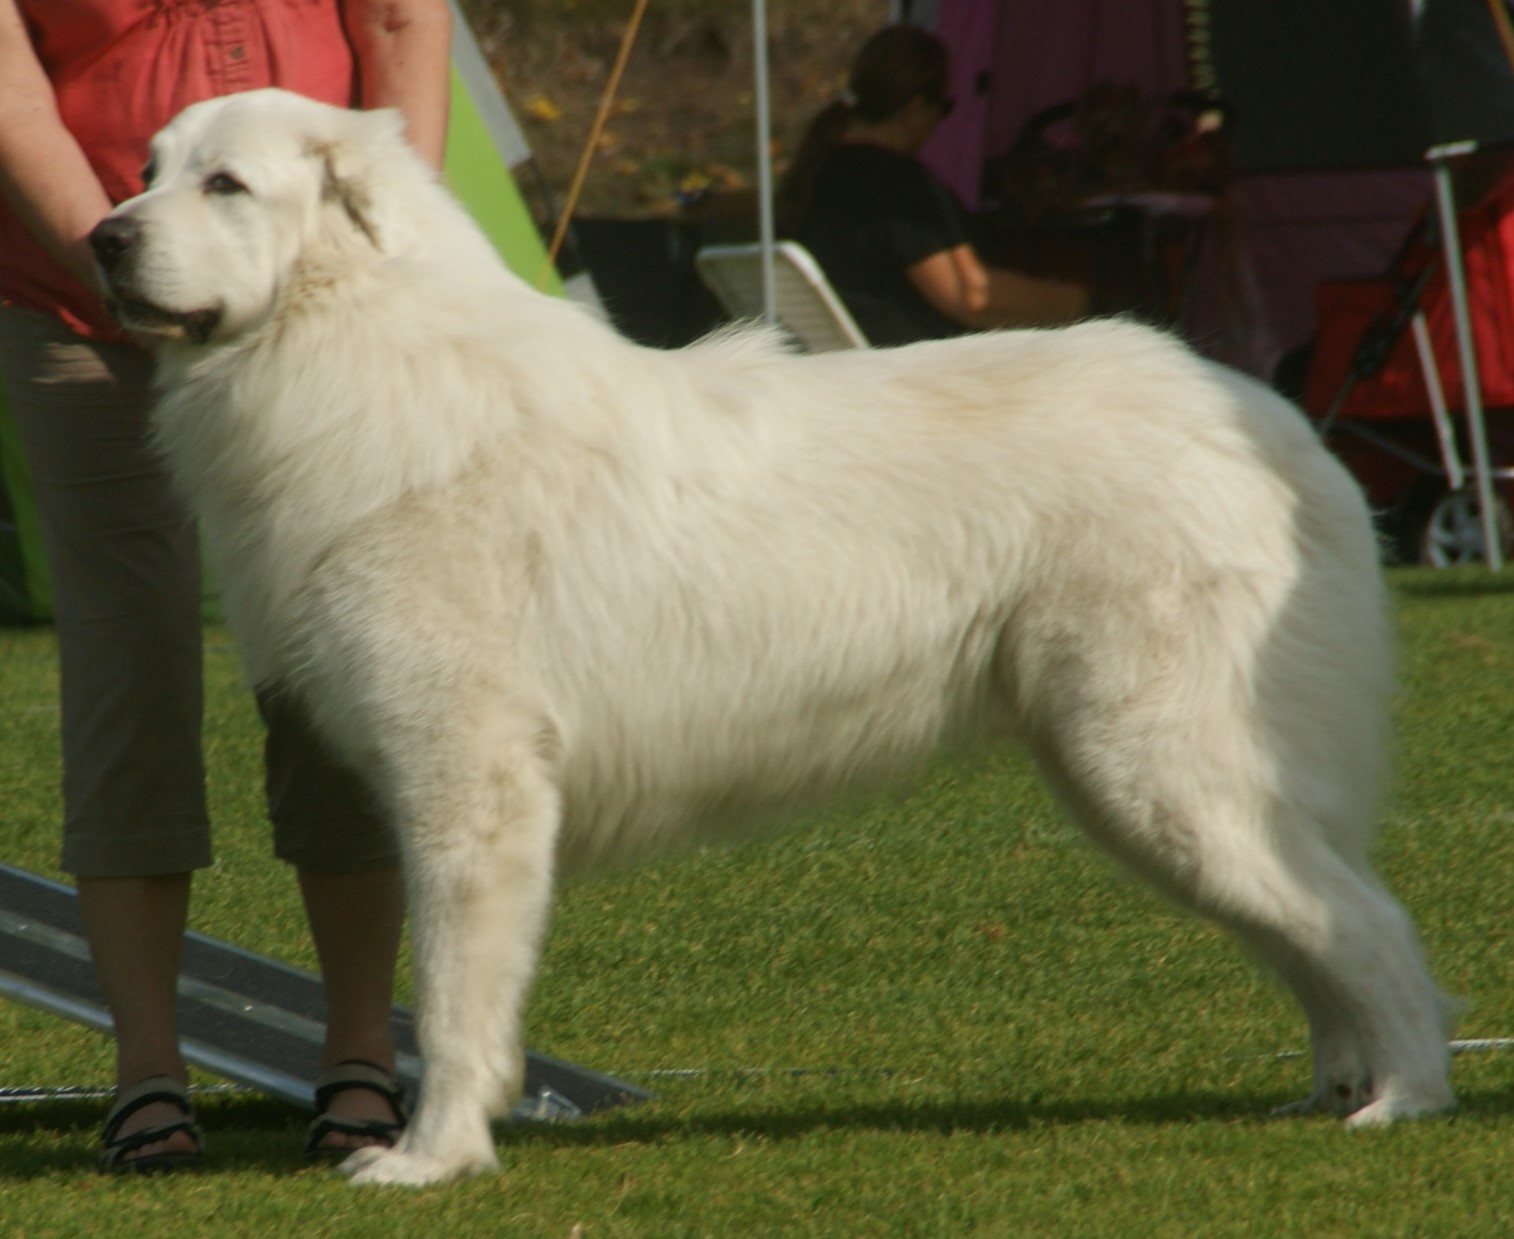 There’s a Reason Why the Great Pyrenees is ‘Great’